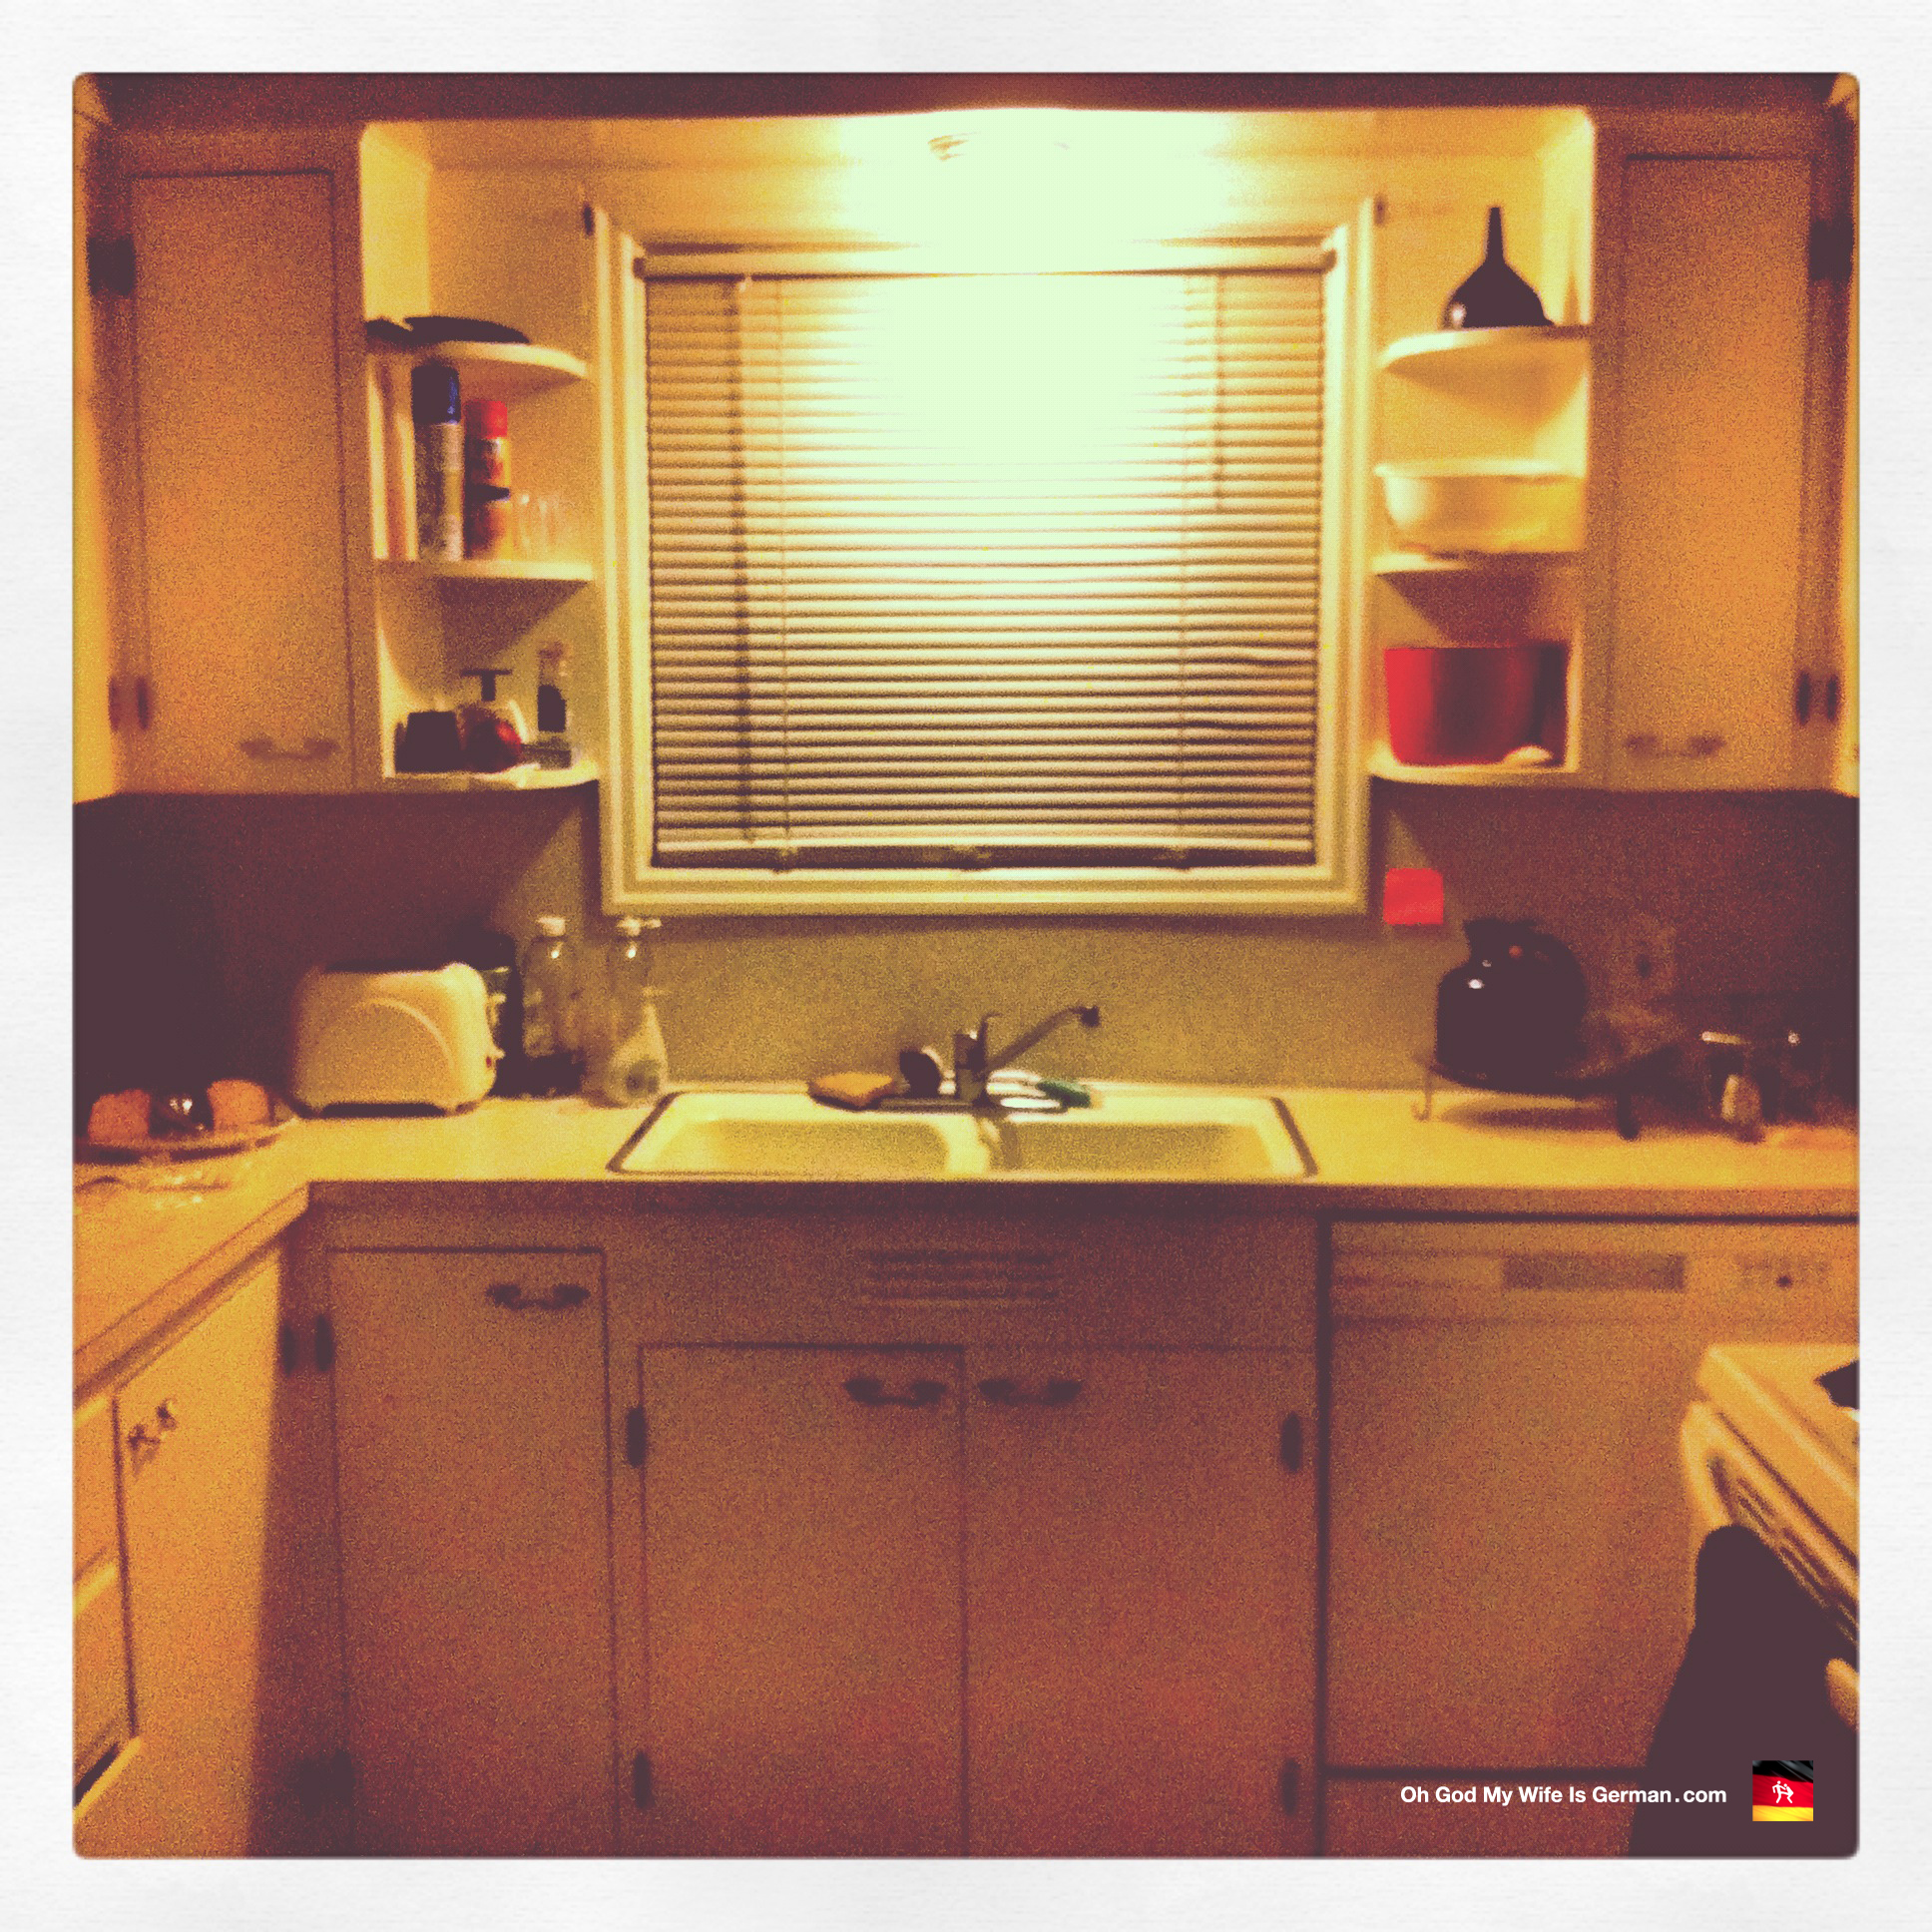 Our kitchen — straight out of the 1970s